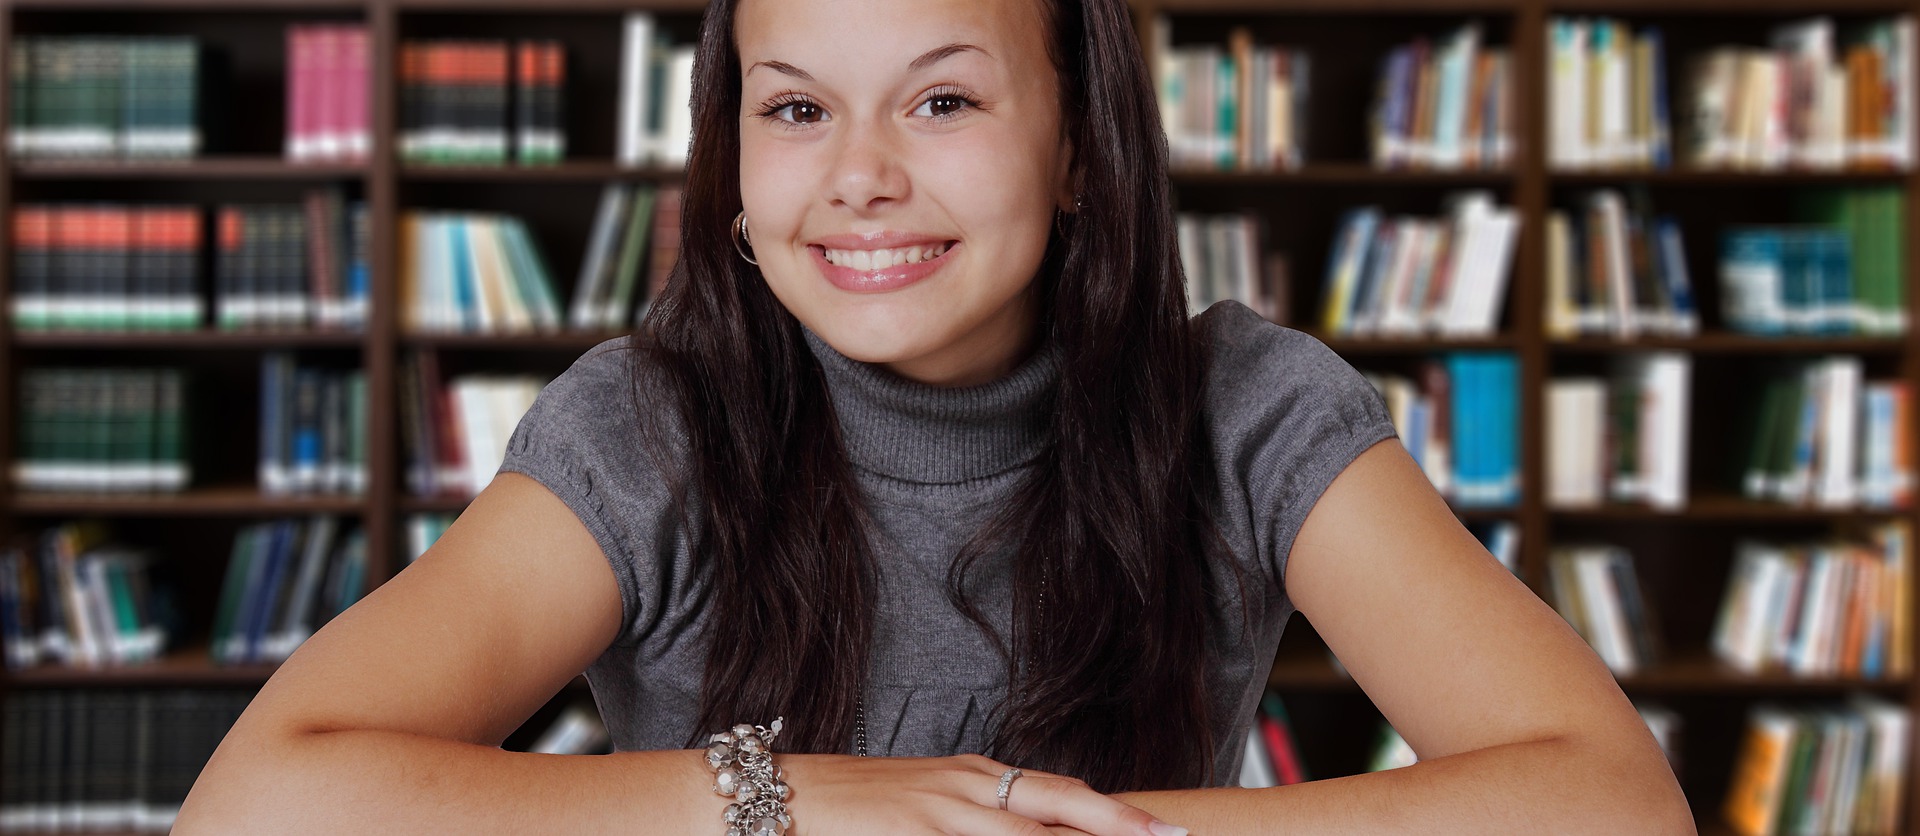 Teen female with brown hair in front of library bookshelves.